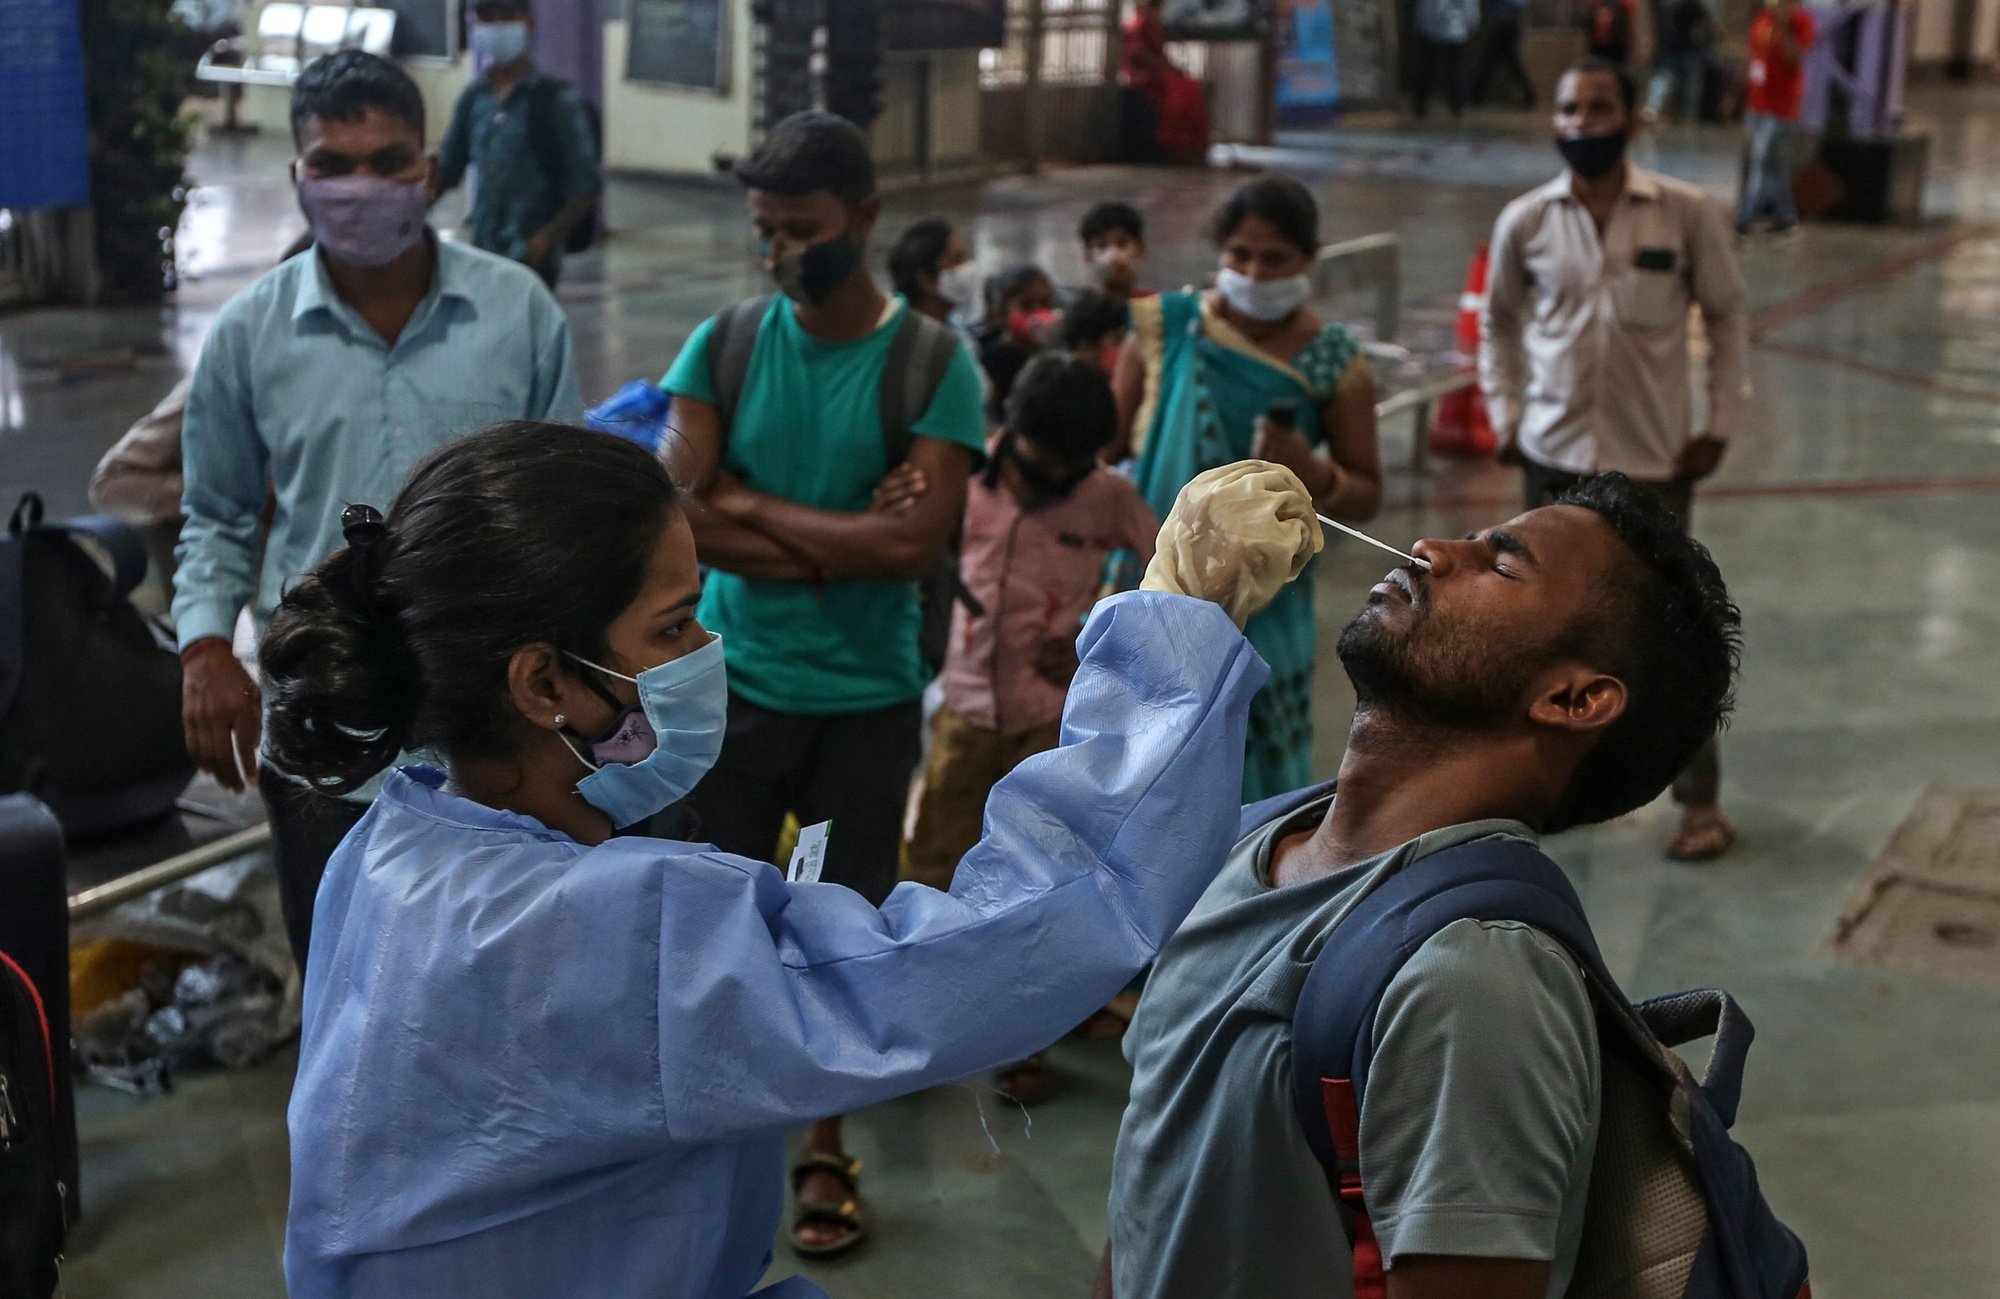 epa09139251 A health worker takes a nasal swab sample of a person to test for COVID-19 at Chhatrapati Shivaji Maharaj Terminus railway station in Mumbai, India, 16 April 2021. A curfew is announced in Mumbai, and many other states as India recorded its highest daily spike of COVID-19 cases on 14 April with around 200,000 new infections in 24 hours.  EPA/DIVYAKANT SOLANKI